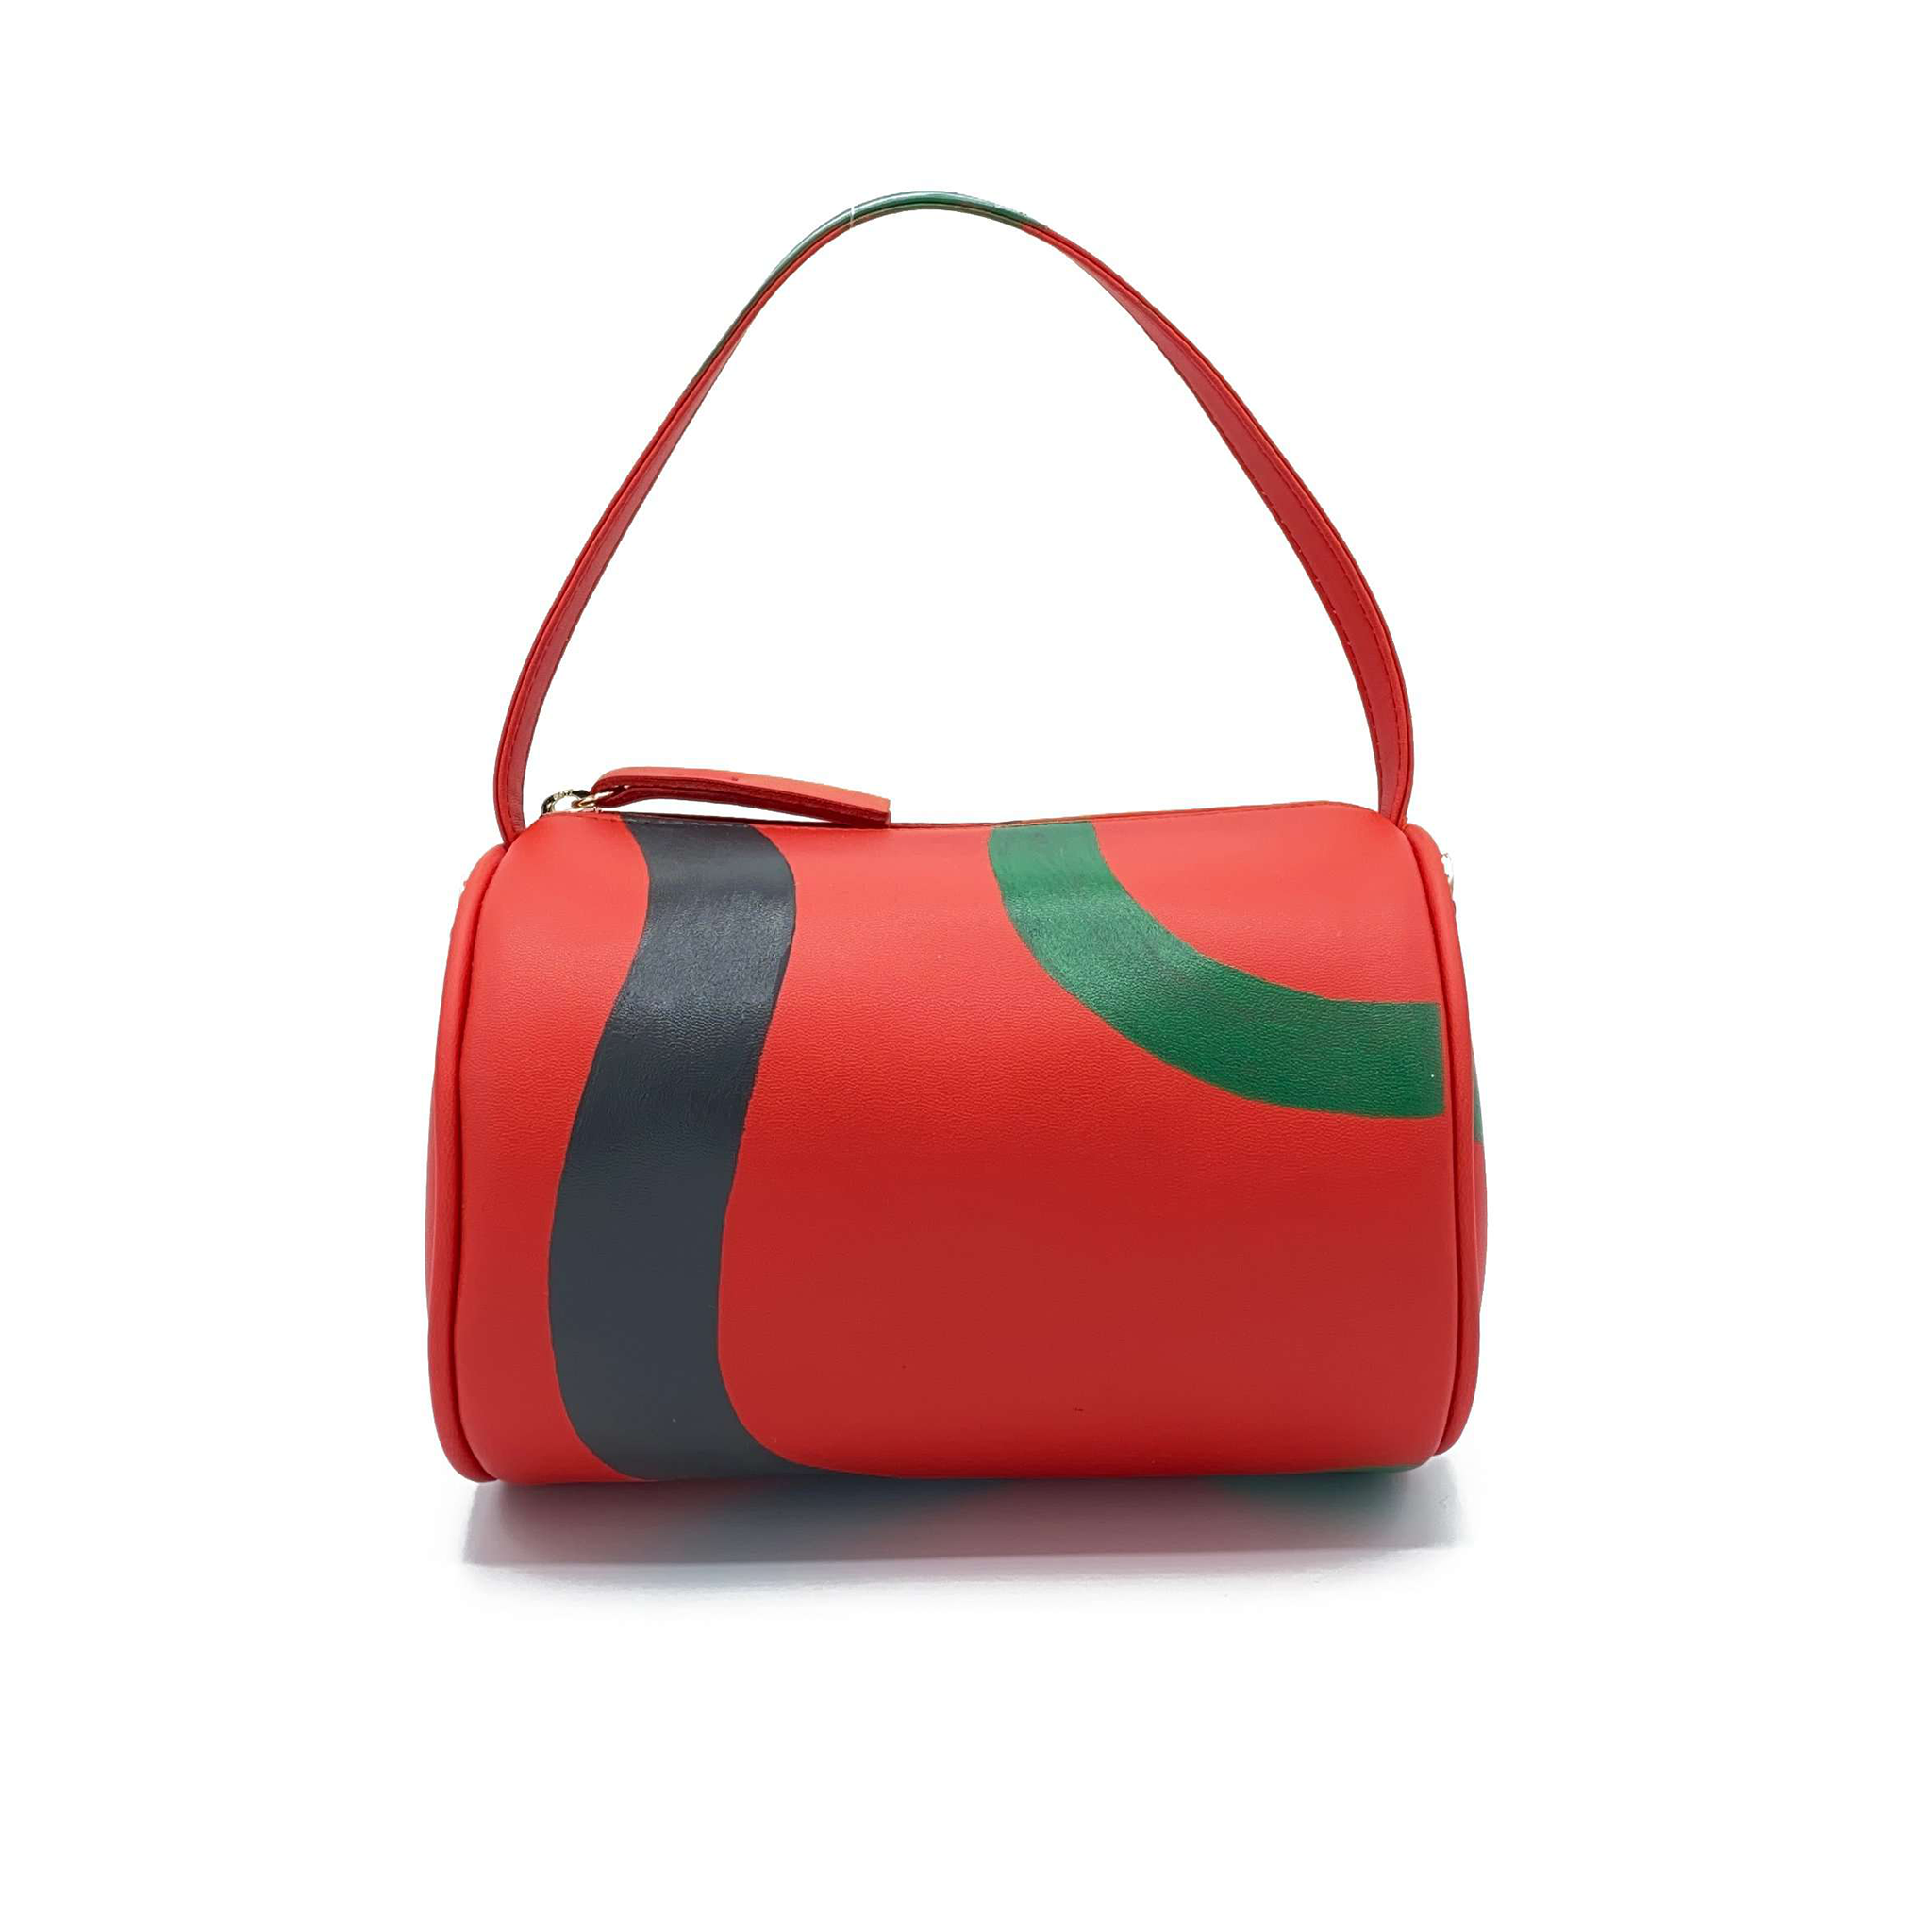 Vegan leather duffle style mini bag with detachable crossbody strap in red with hand painted squiggles in black and green.  